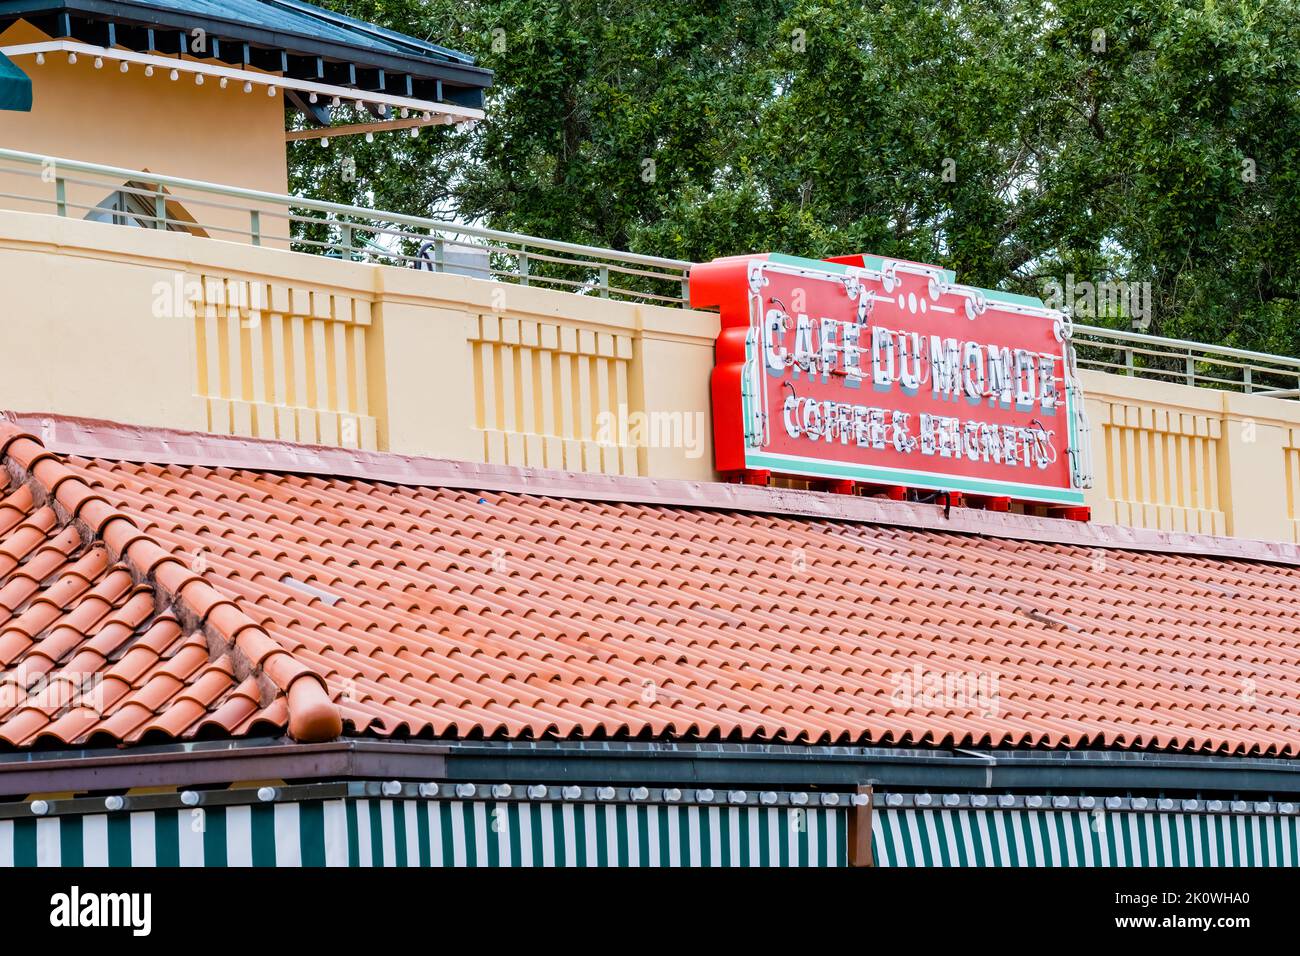 NEW ORLEANS, LA, USA - SEPTEMBER 22, 2019: Cafe Du Monde sign and top of building in City Park Stock Photo